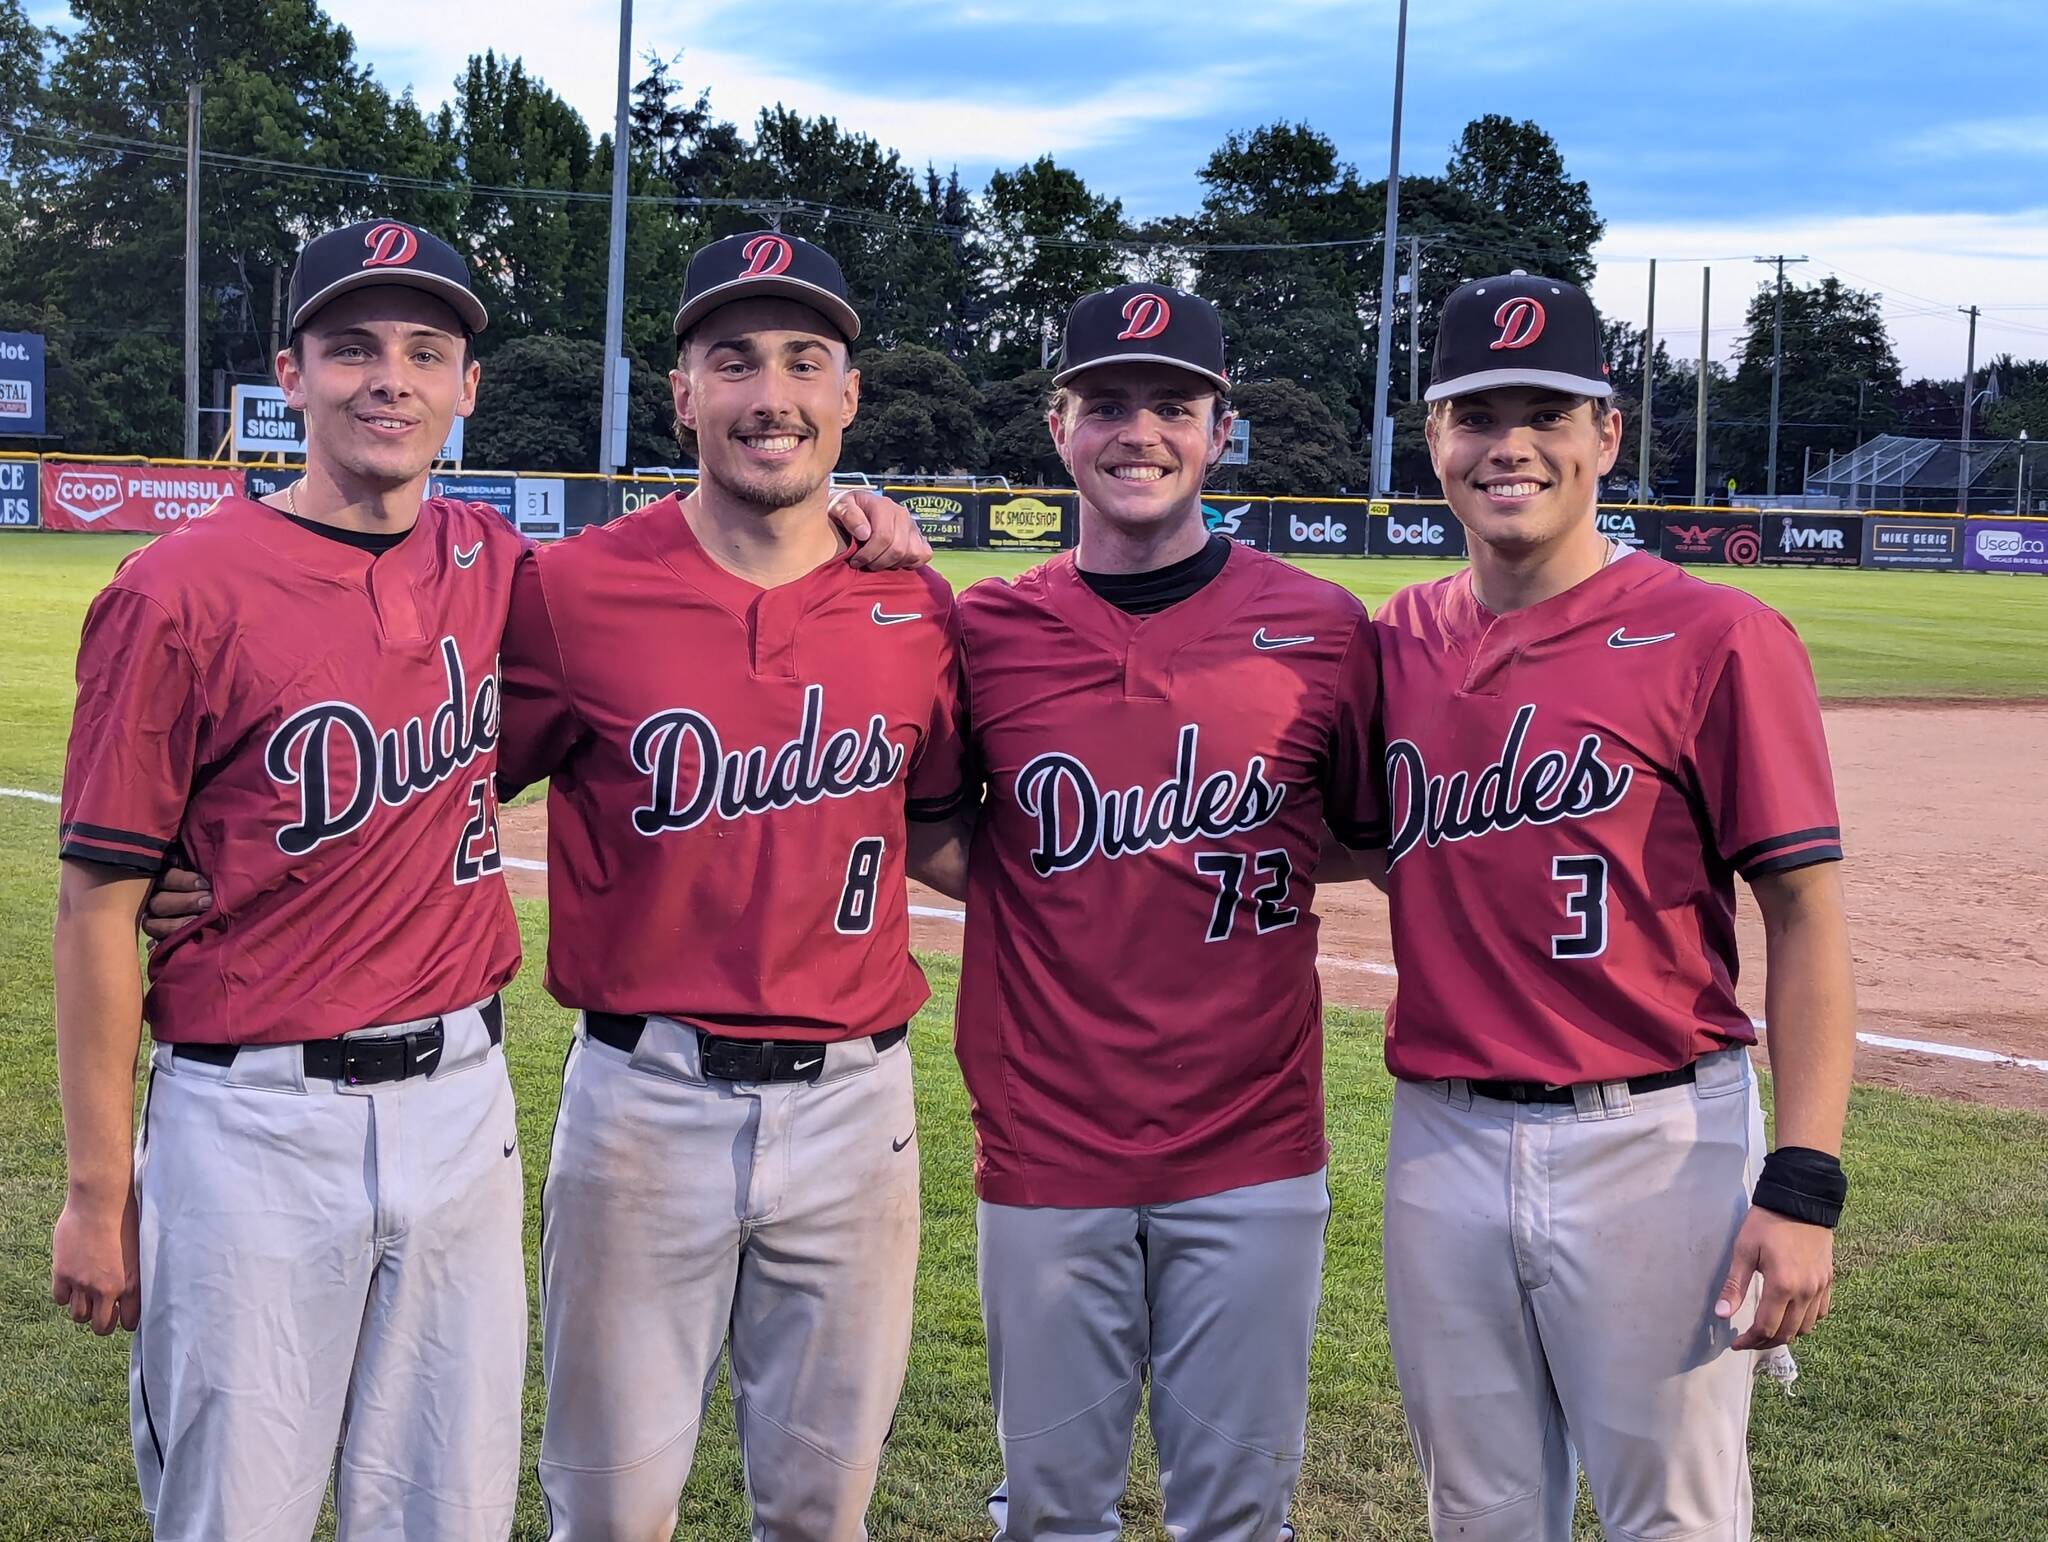 Mercer Island High School graduates, from left to right, Gov Aufranc, Austin Cupic, Cutter Werdel and Jack Varney are currently playing for the Redmond Dudes Baseball Club in the Pacific International League. Photo courtesy of Joe Gray